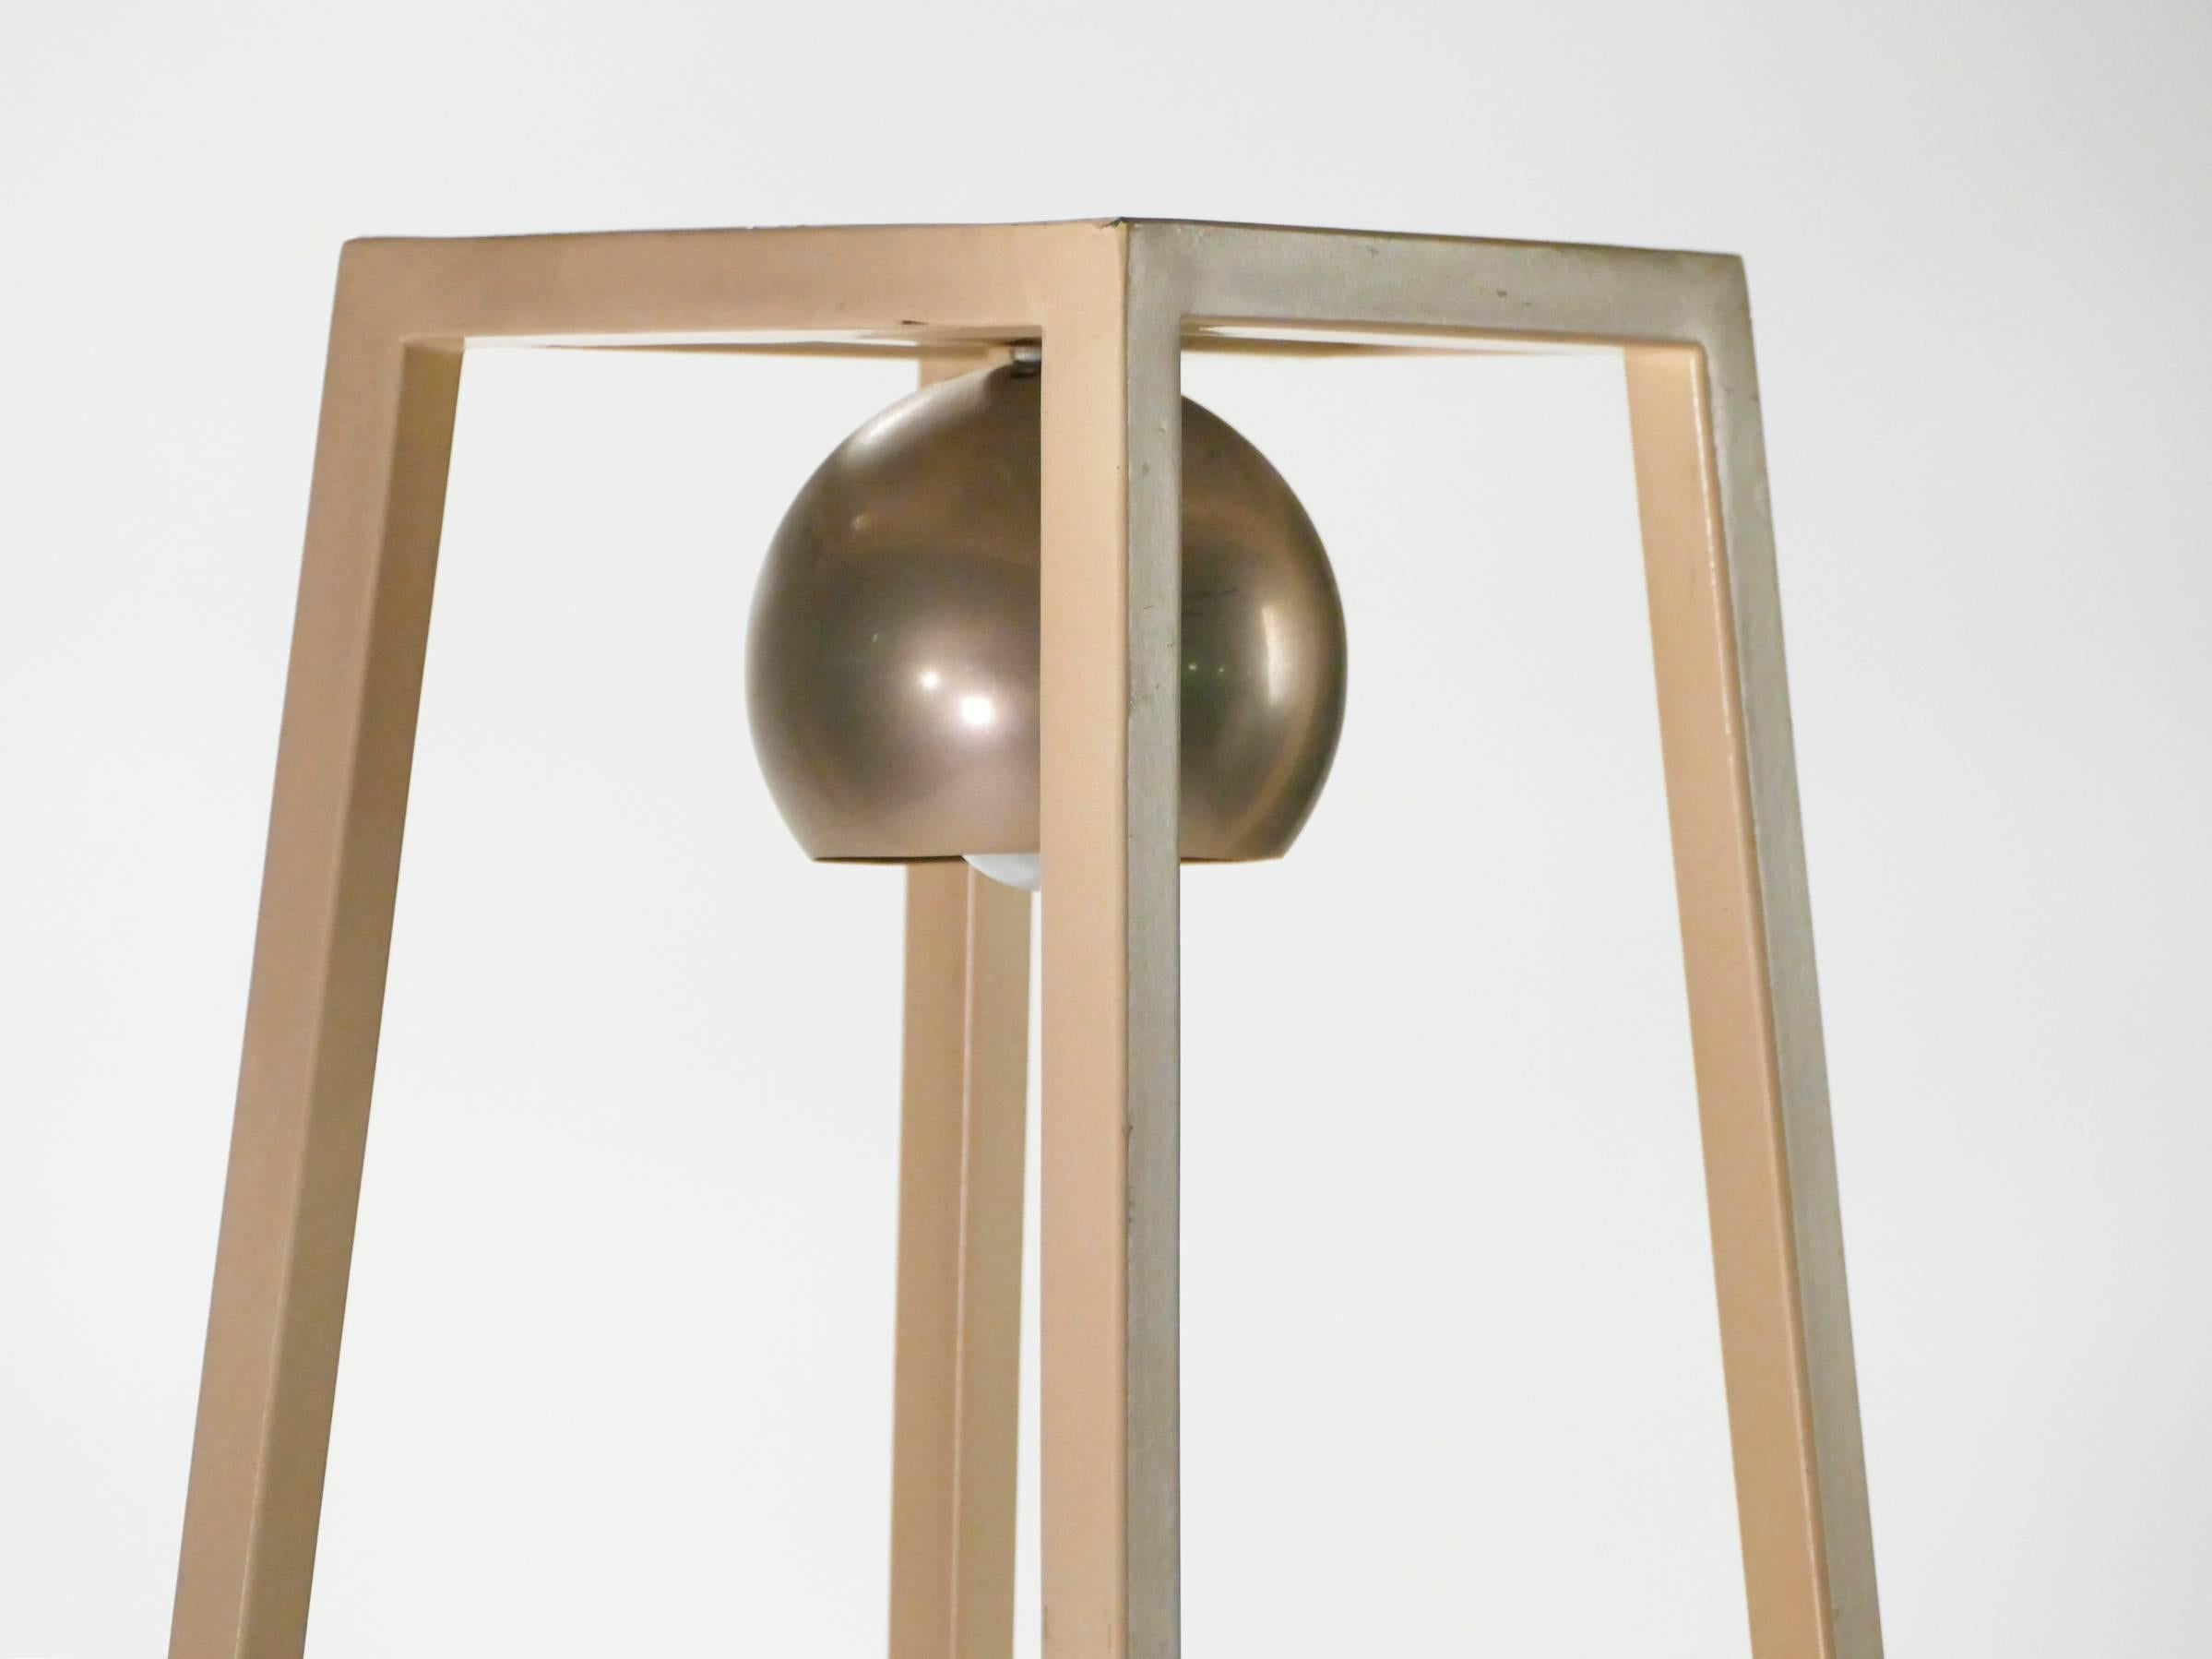 Italian Willy Rizzo Lacquer Brass Floor Lamp with Shelves, 1970s